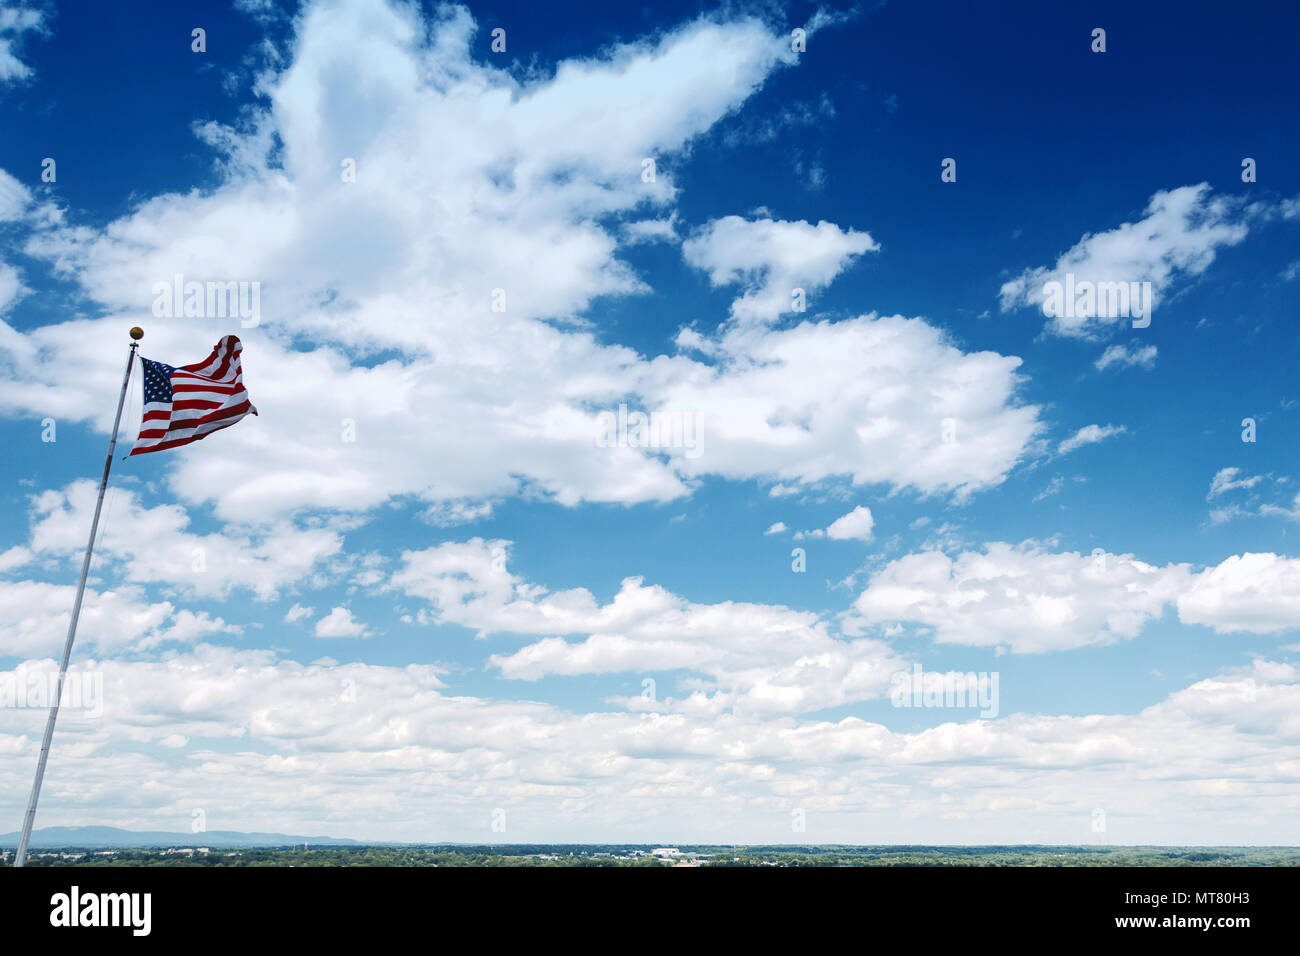 American Flag against Blue Sky and Appalachian Mountains. Stock Photo